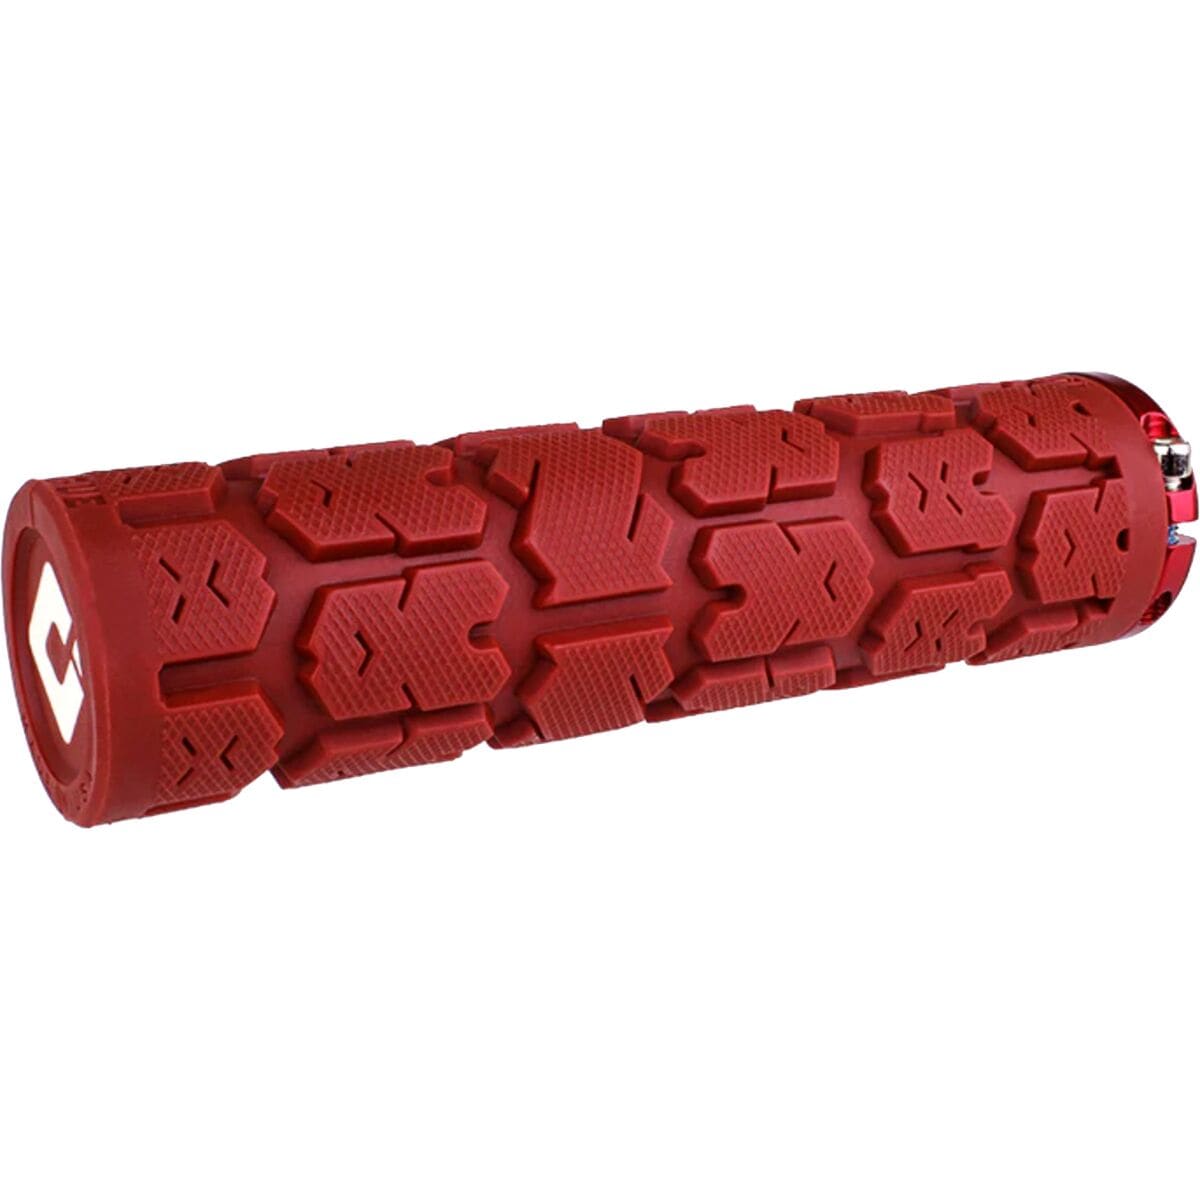 ODI Rogue v2.1 Lock-On Grips Red, One Size